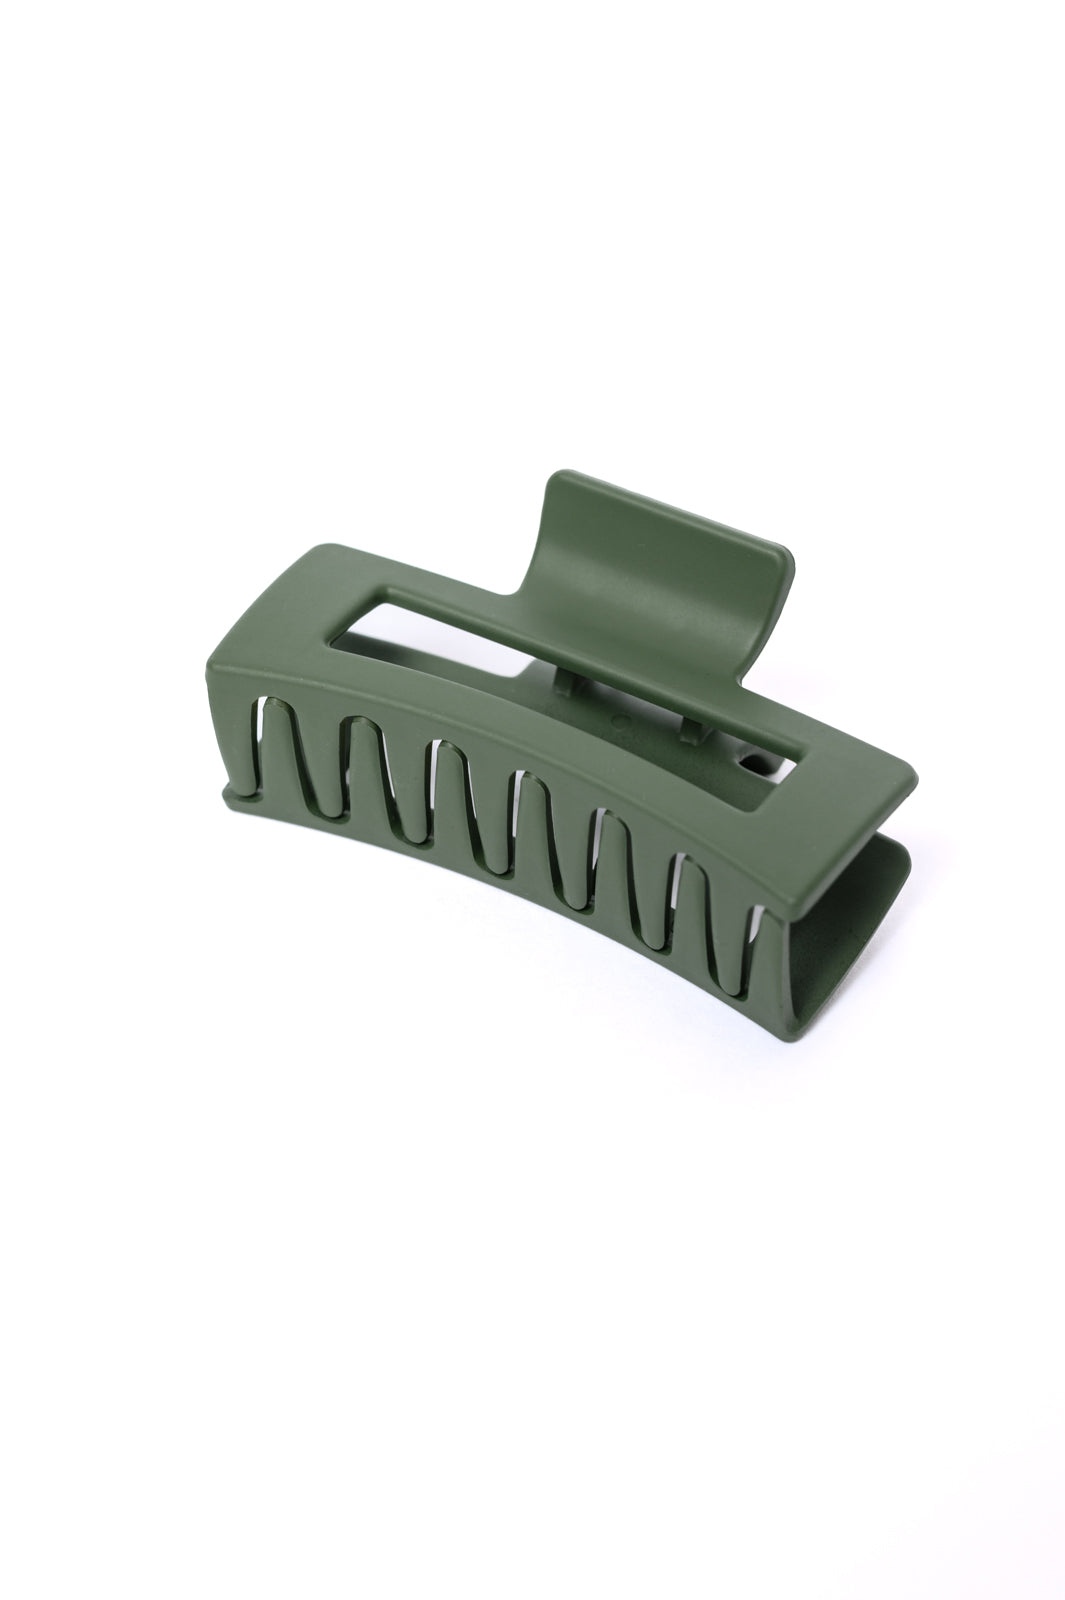 Claw Clip Set of 4 in Forest Green (Online Exclusive)